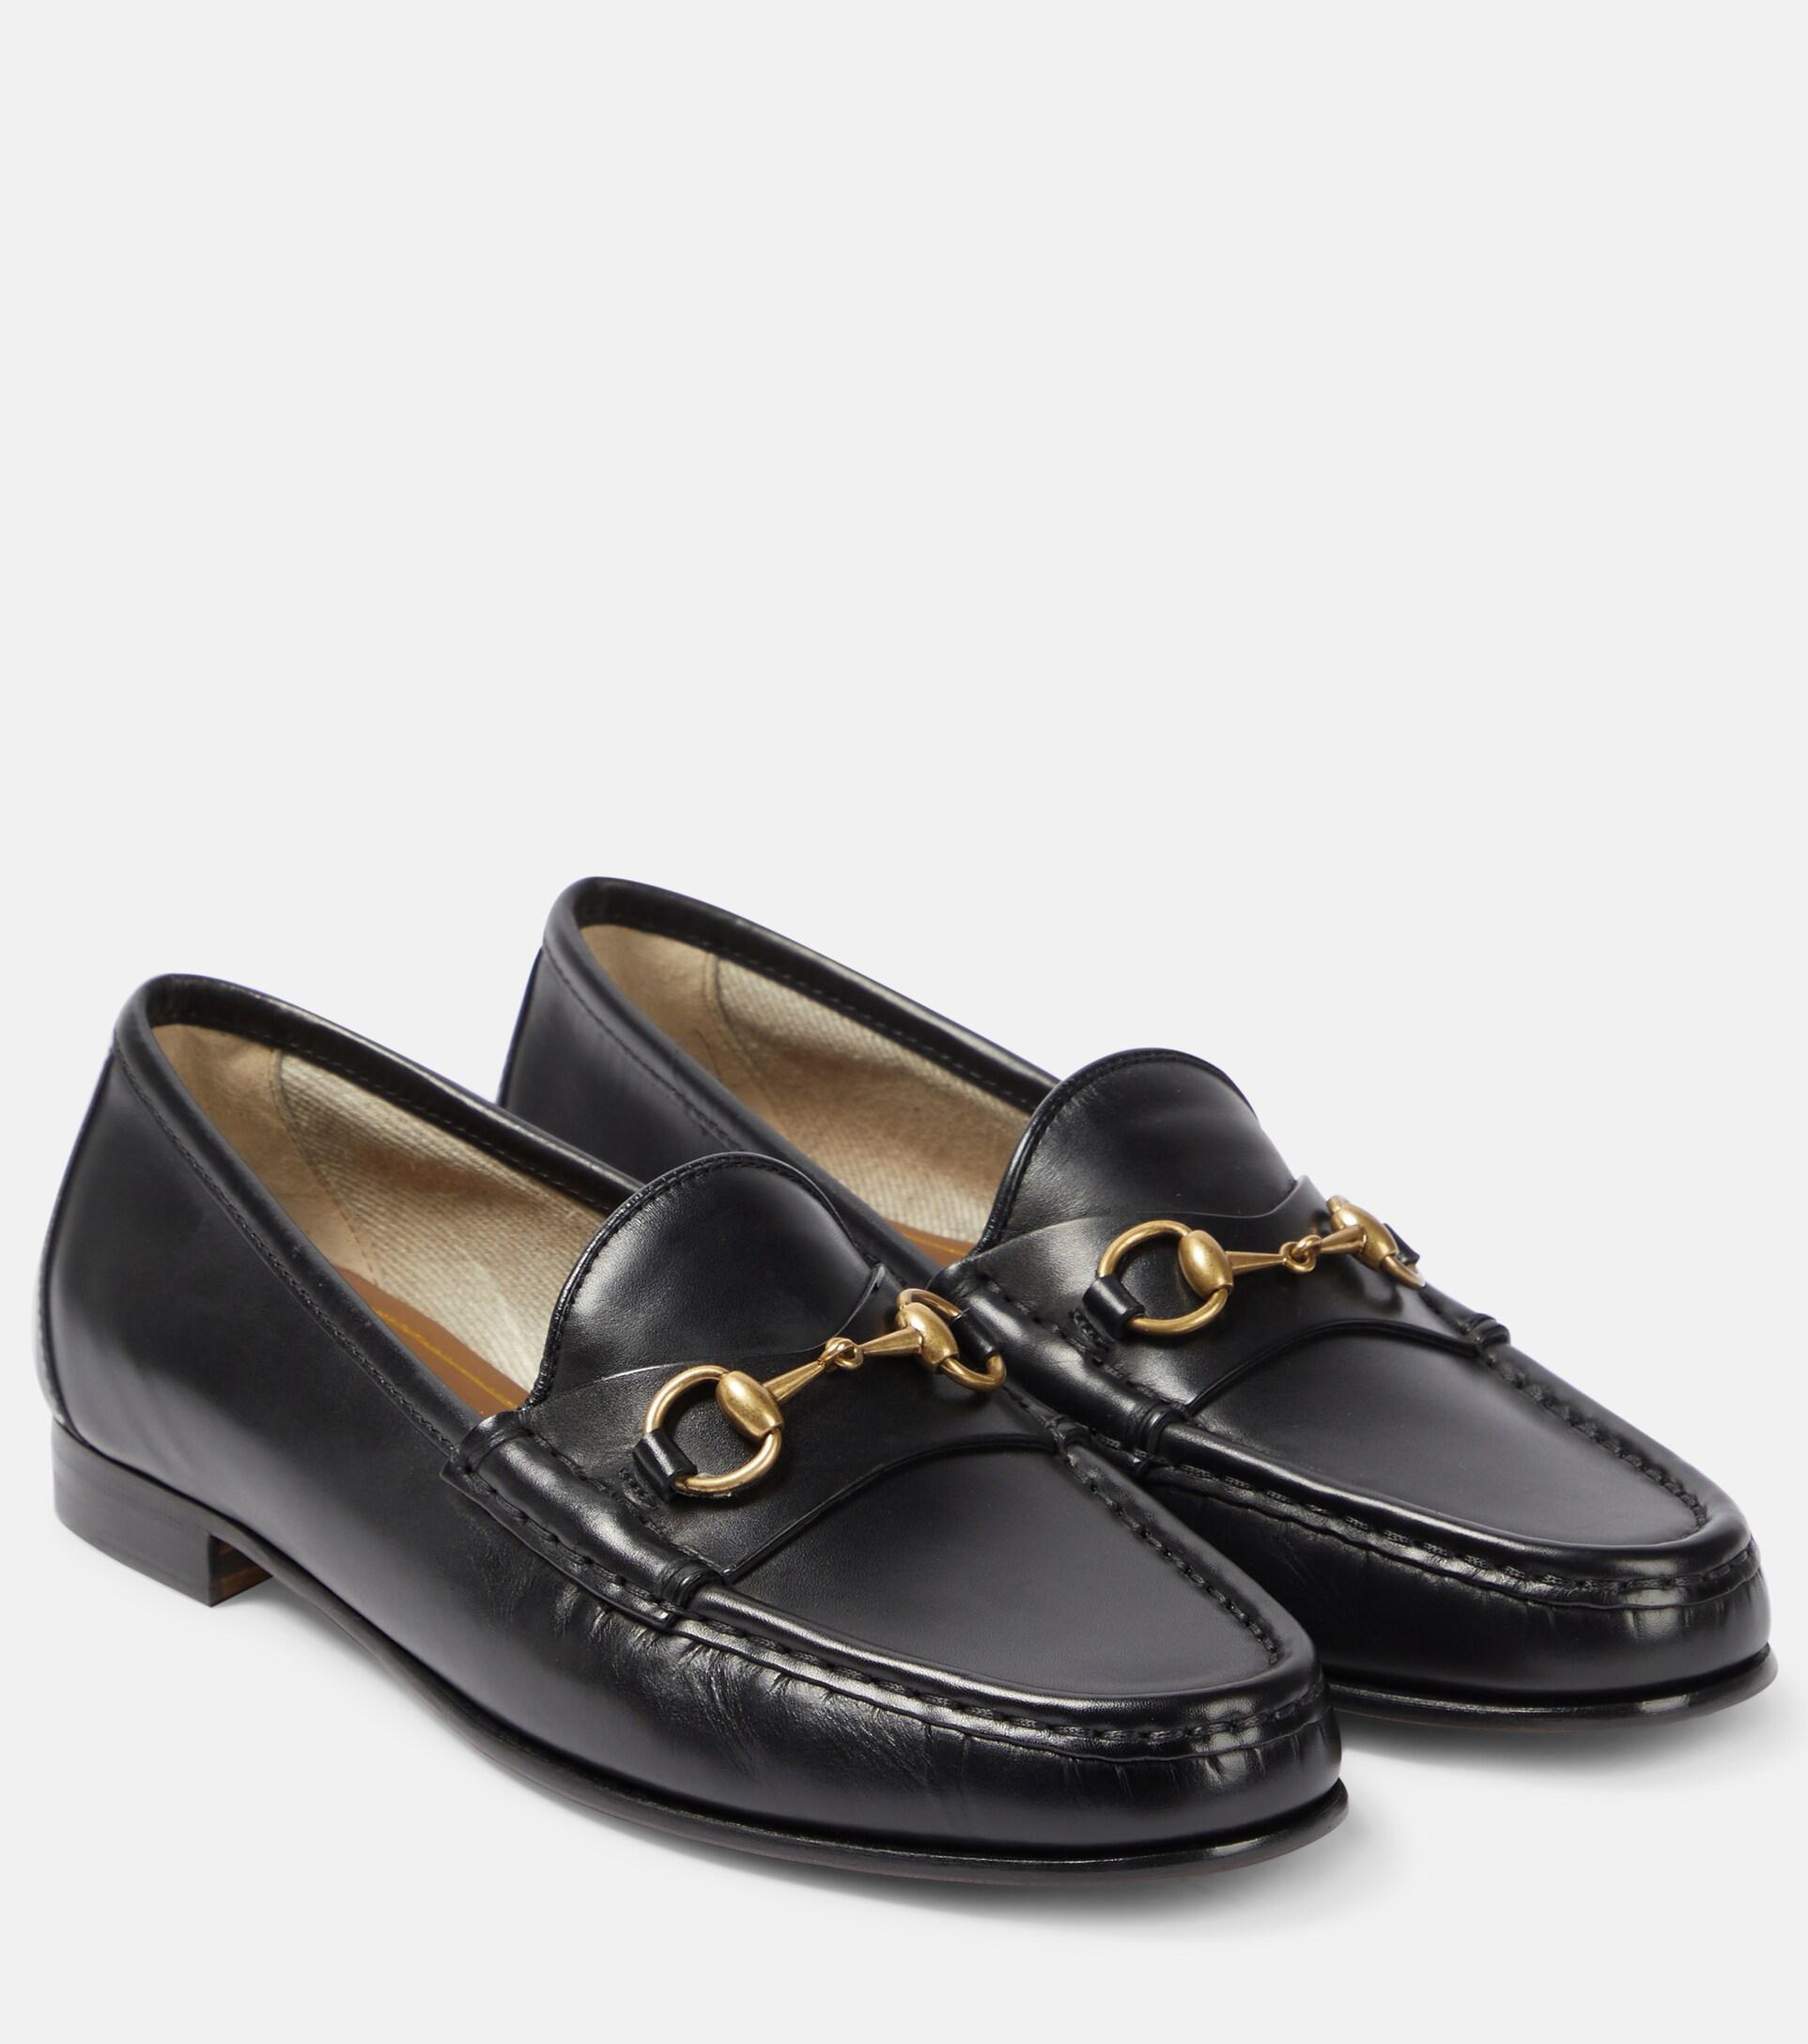 Gucci 1953 Horsebit Leather Loafers in Black | Lyst